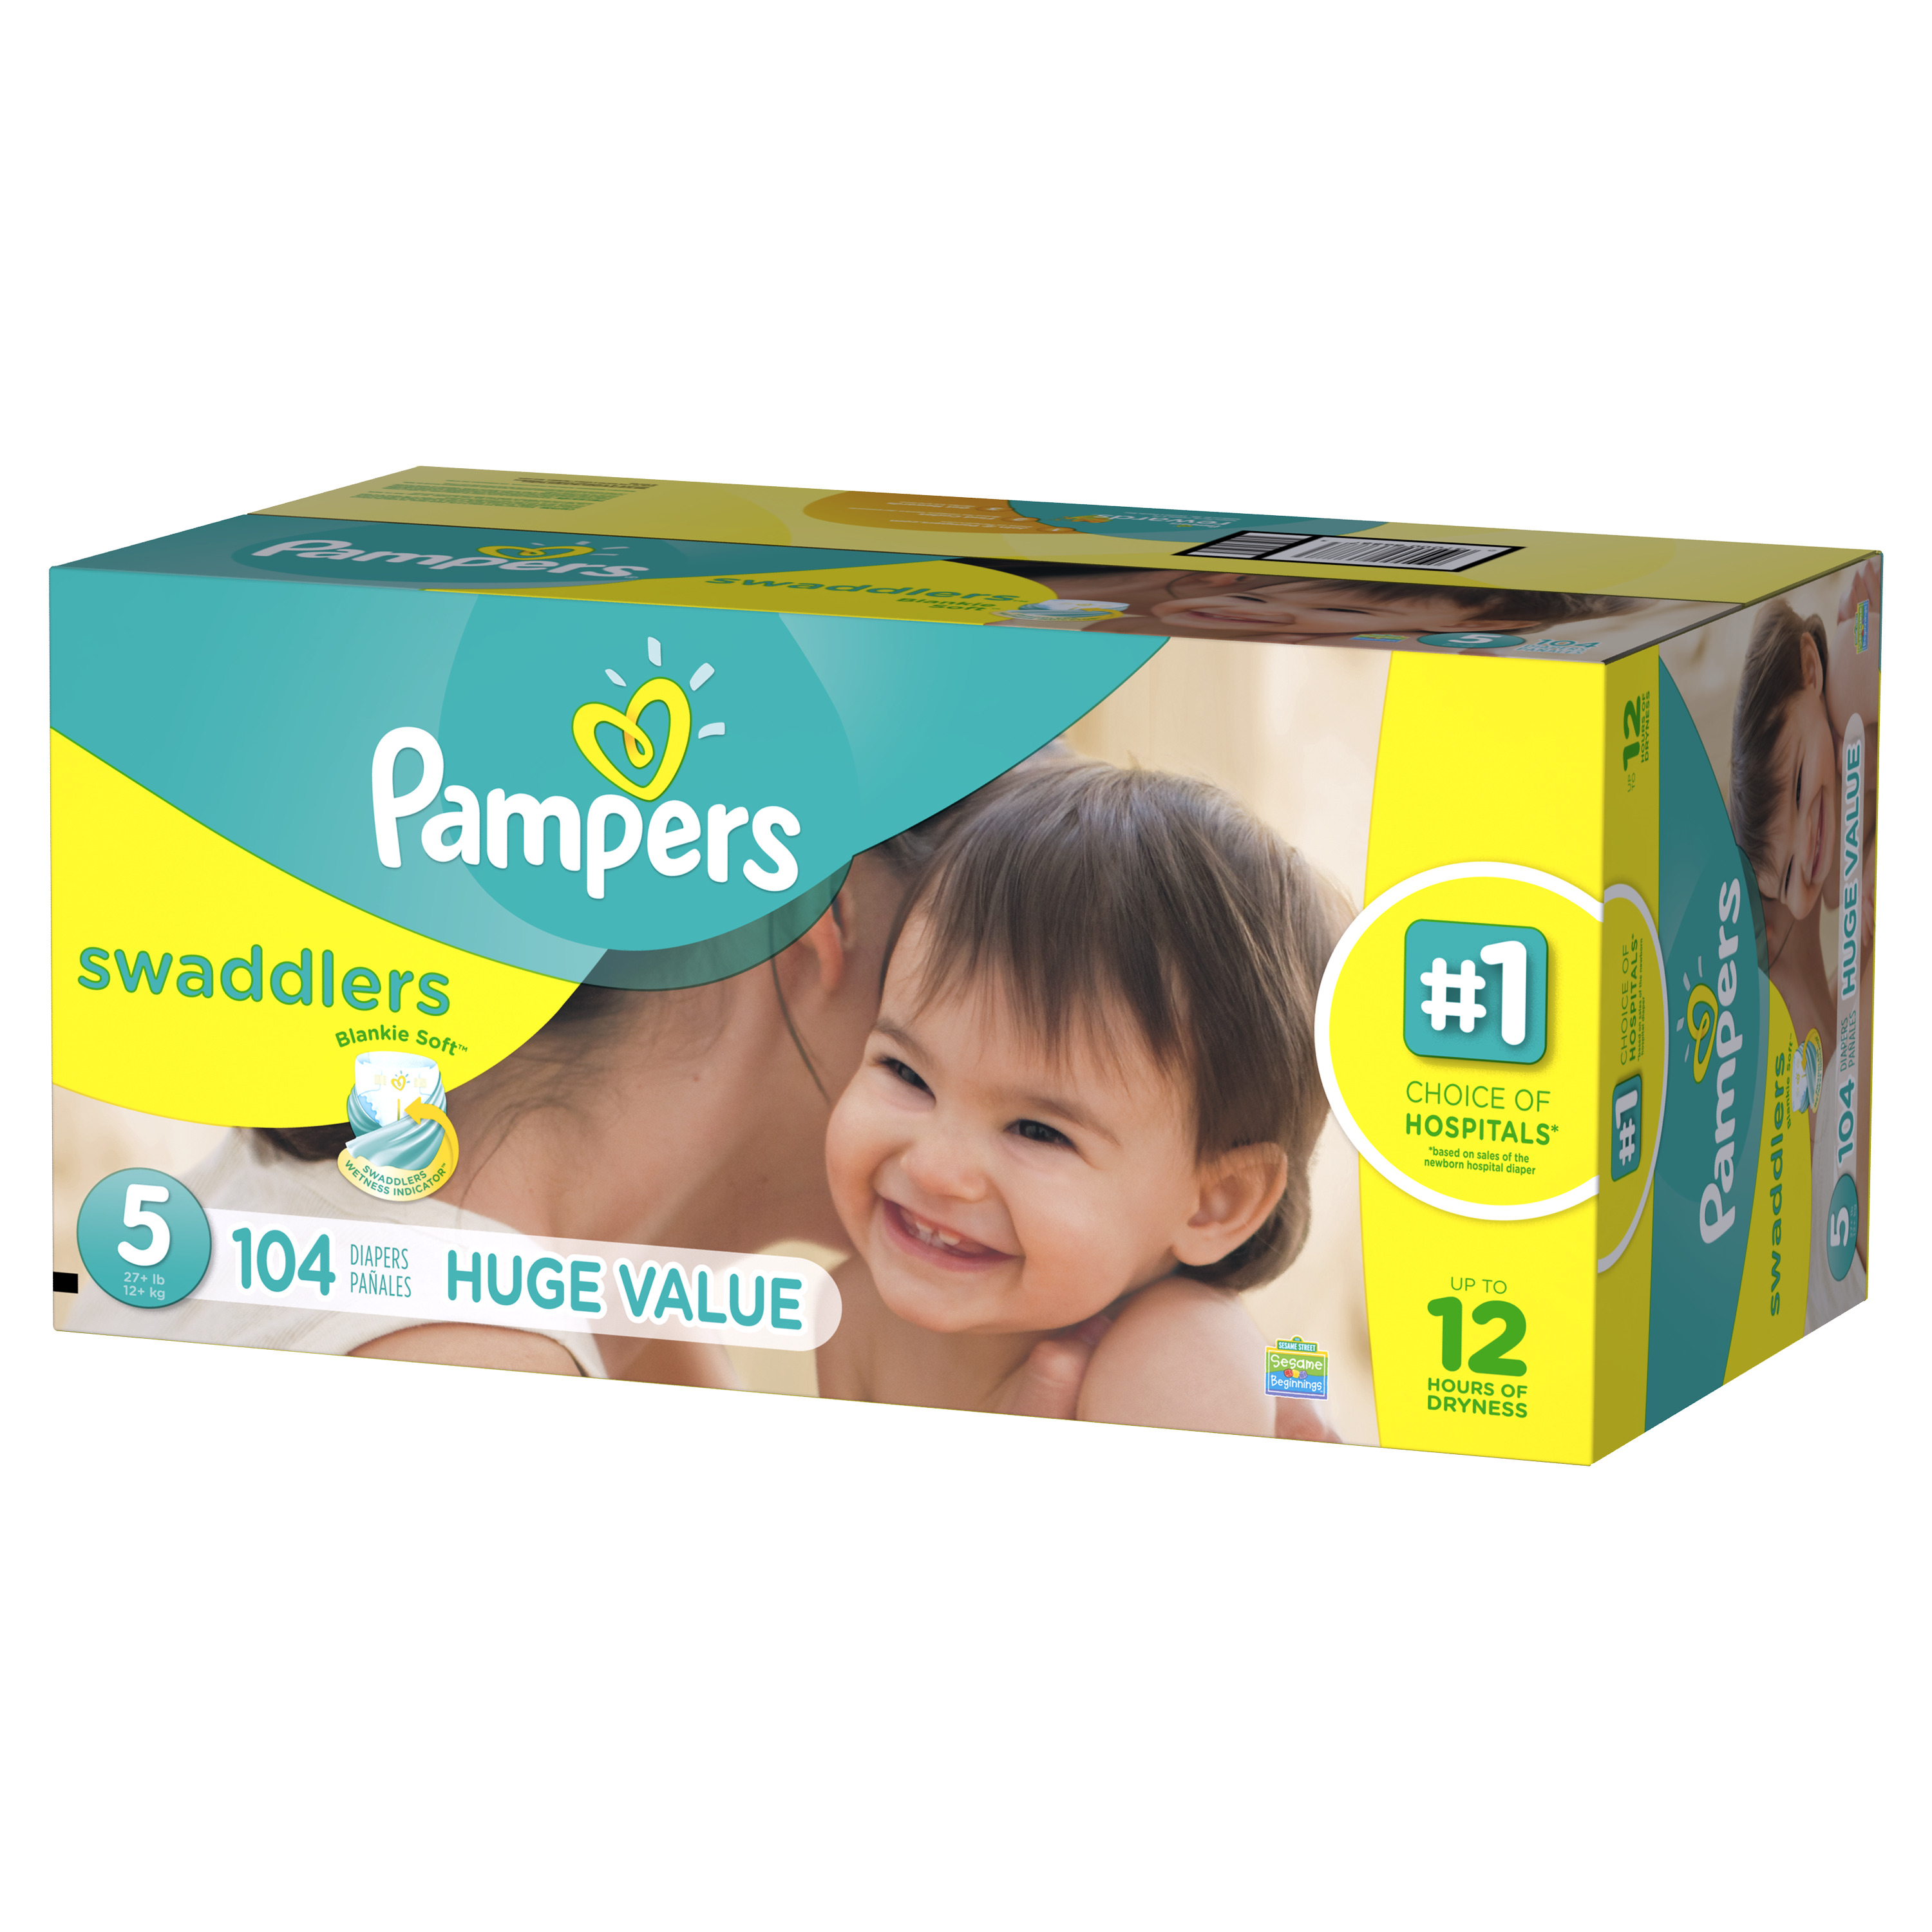 Pampers Swaddlers Diapers Size 5 104 count - image 1 of 10